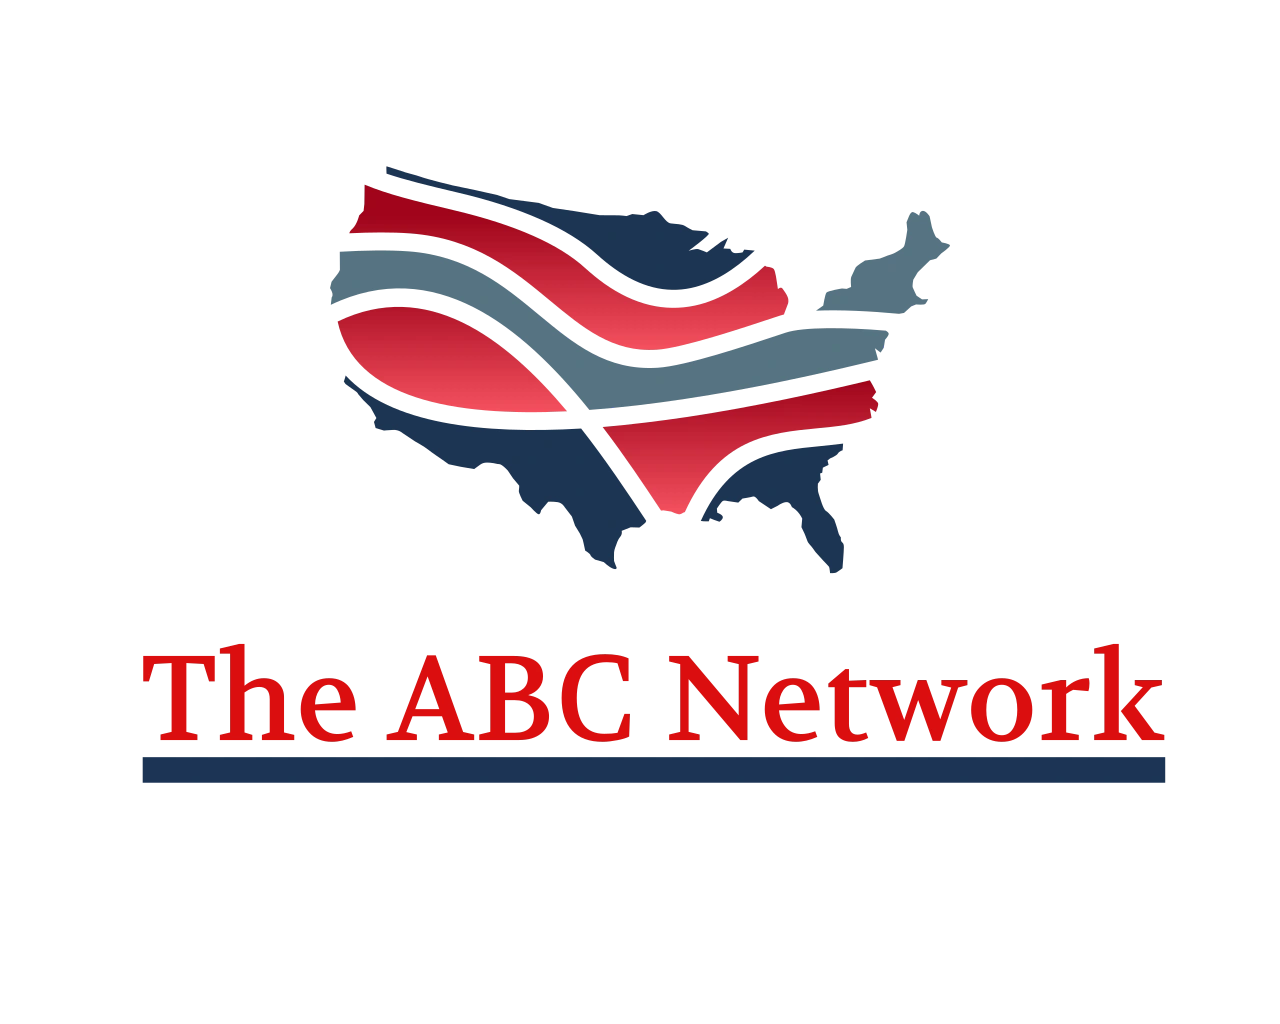 The ABC Network